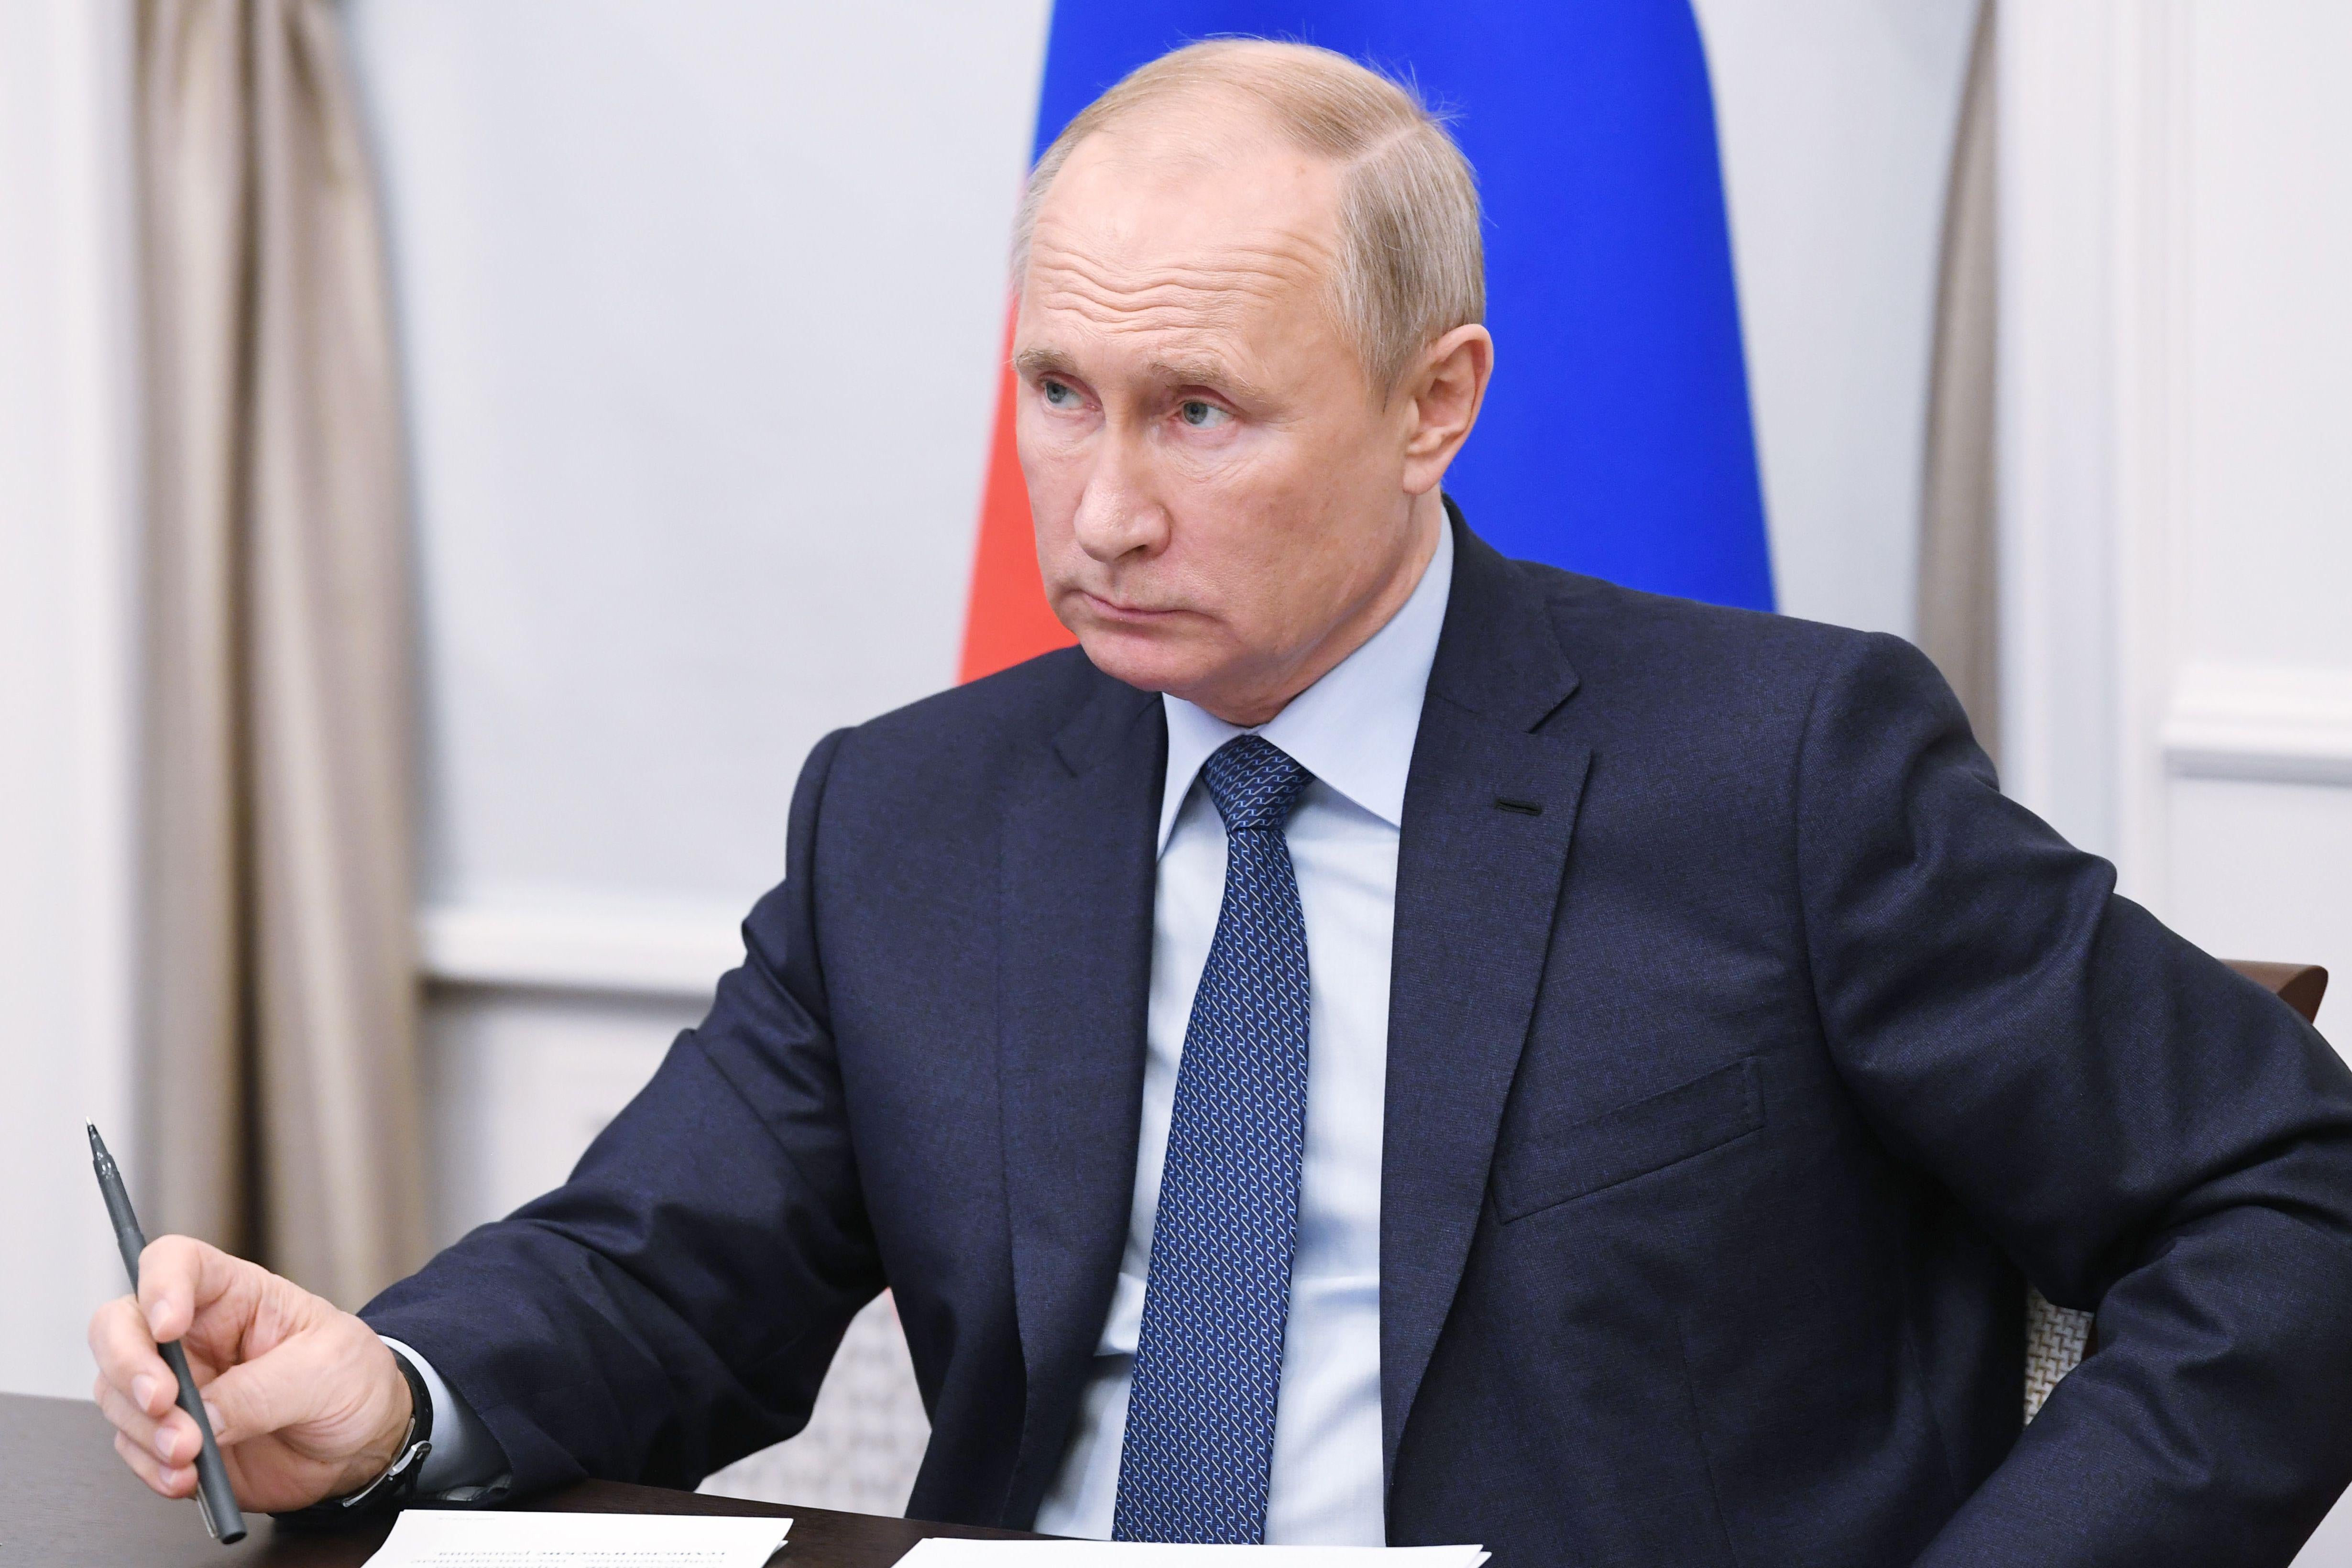 Putin sitting at a desk holding a pen, with a Russian flag behind him